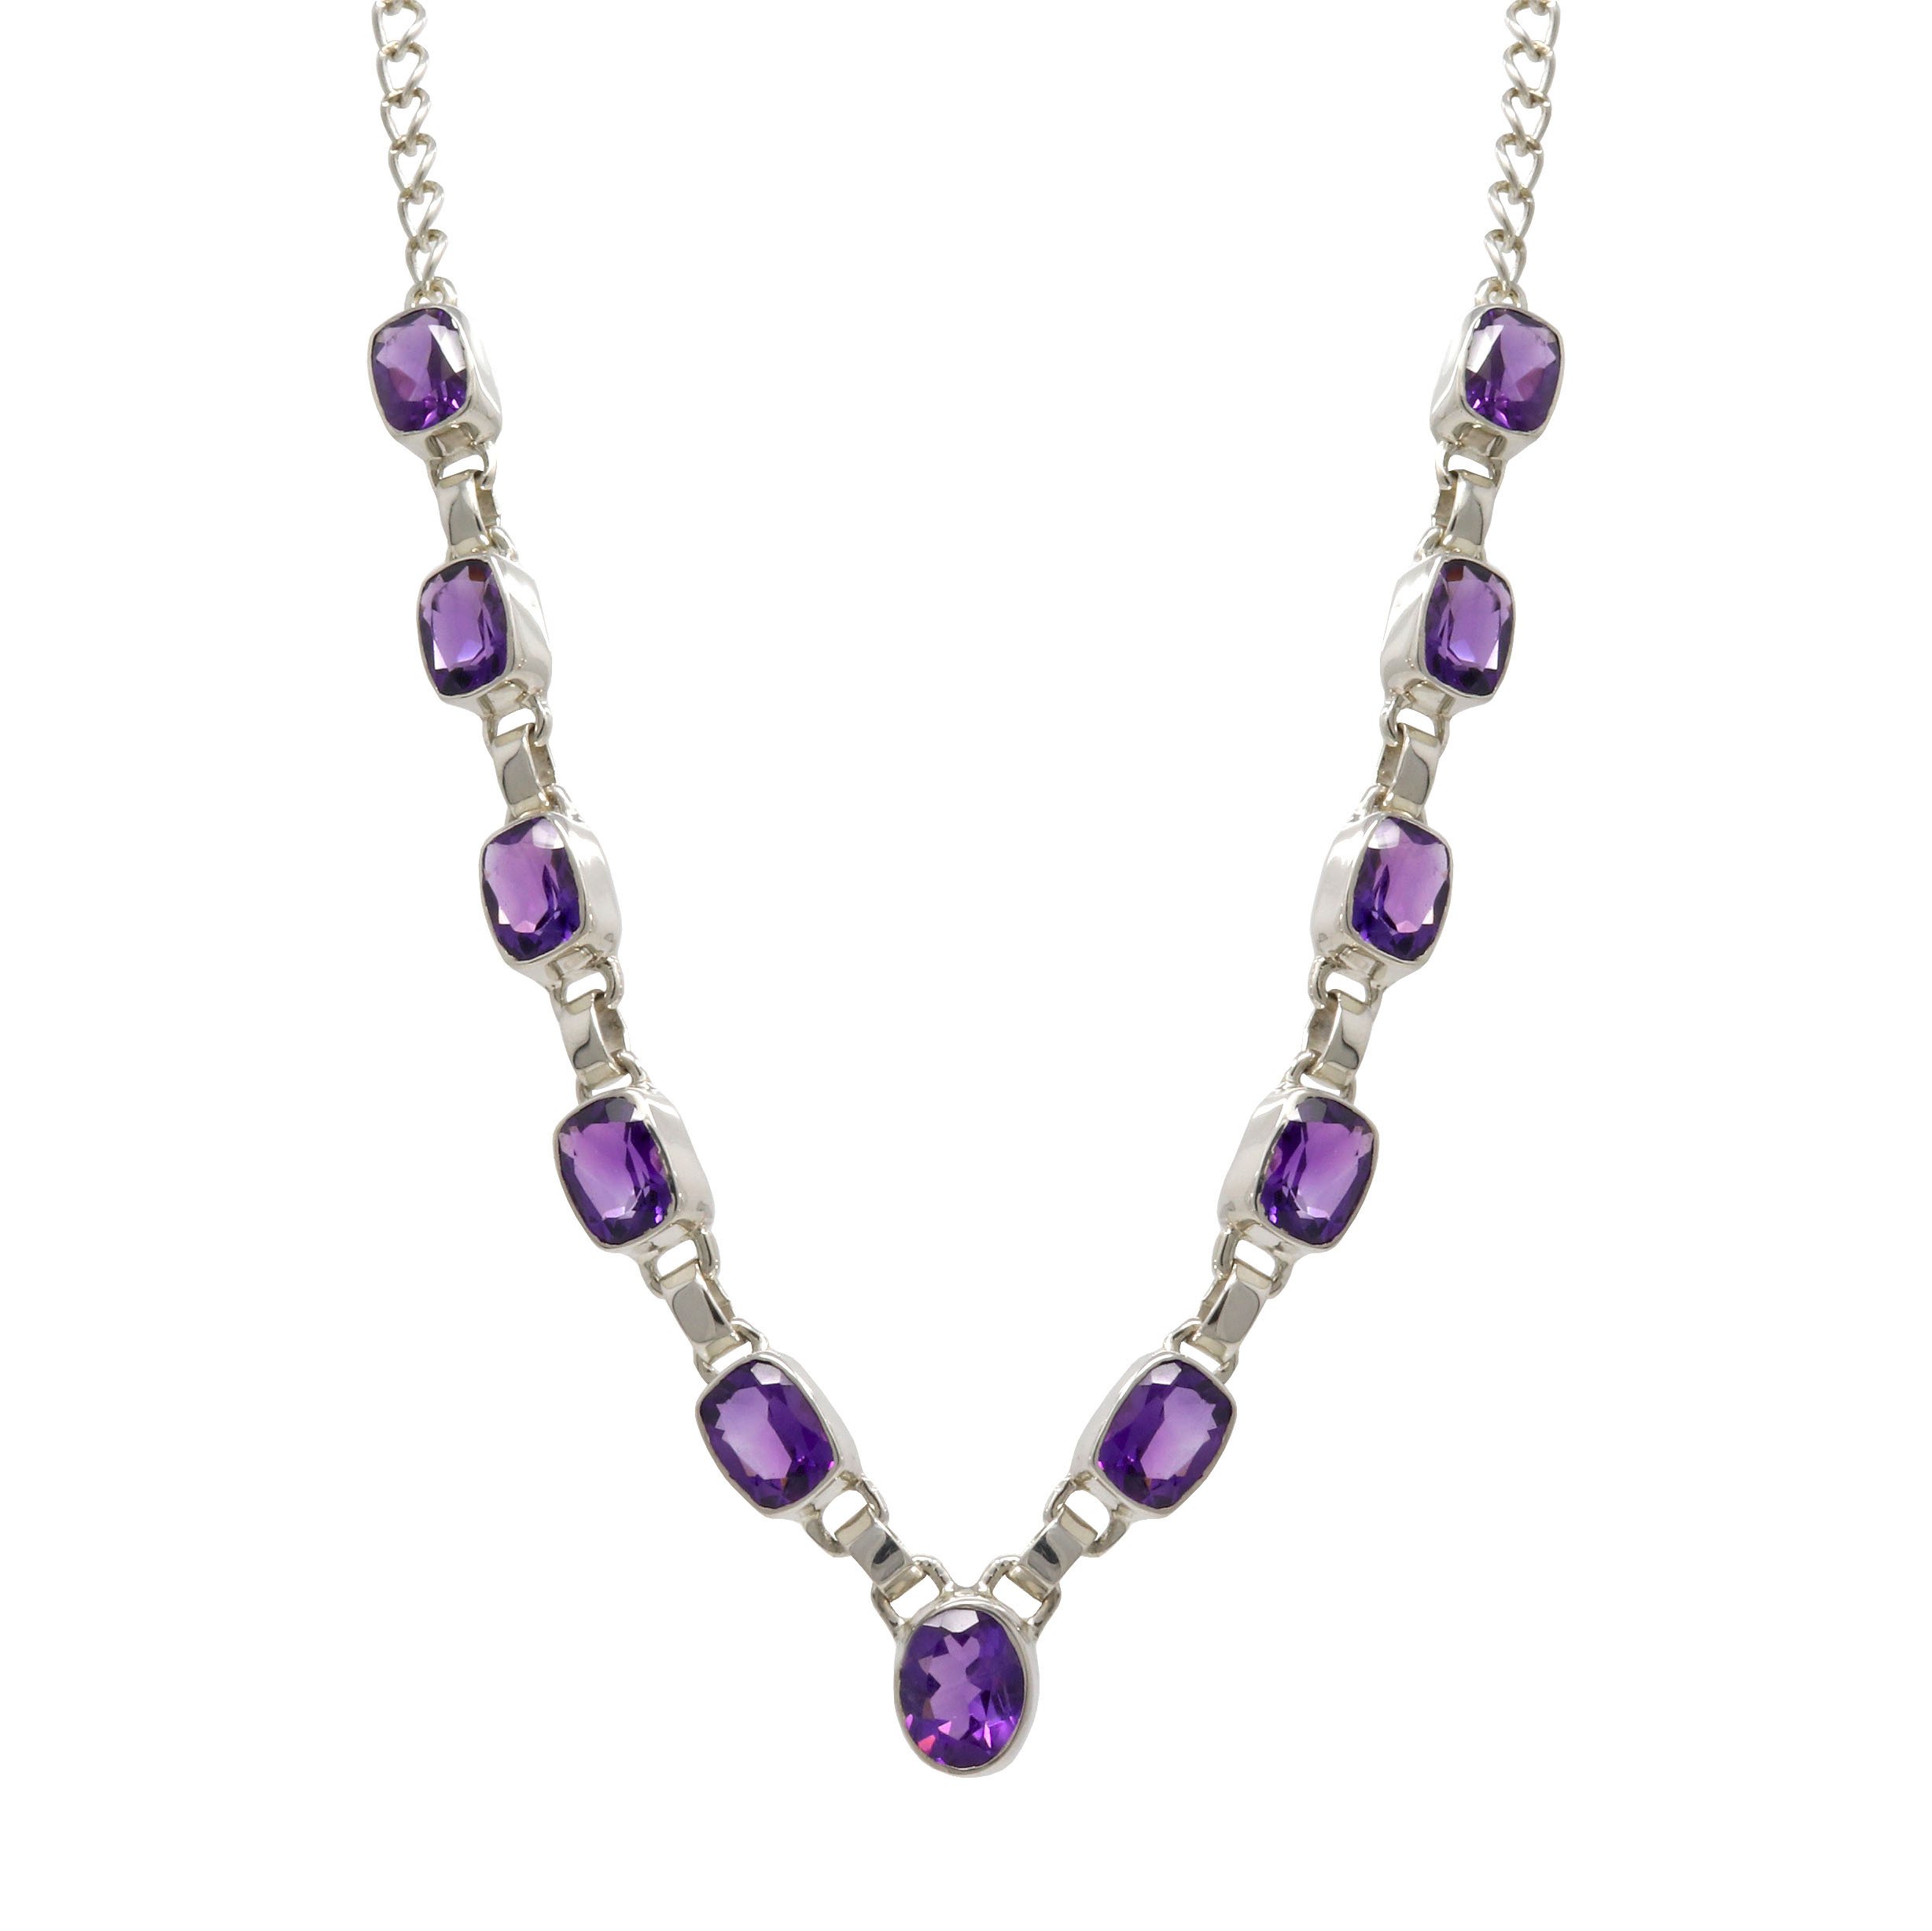 Faceted Amethyst Necklace - 10 Rectangles With 1 Oval Centerpiece Set In Simple Silver Bezels